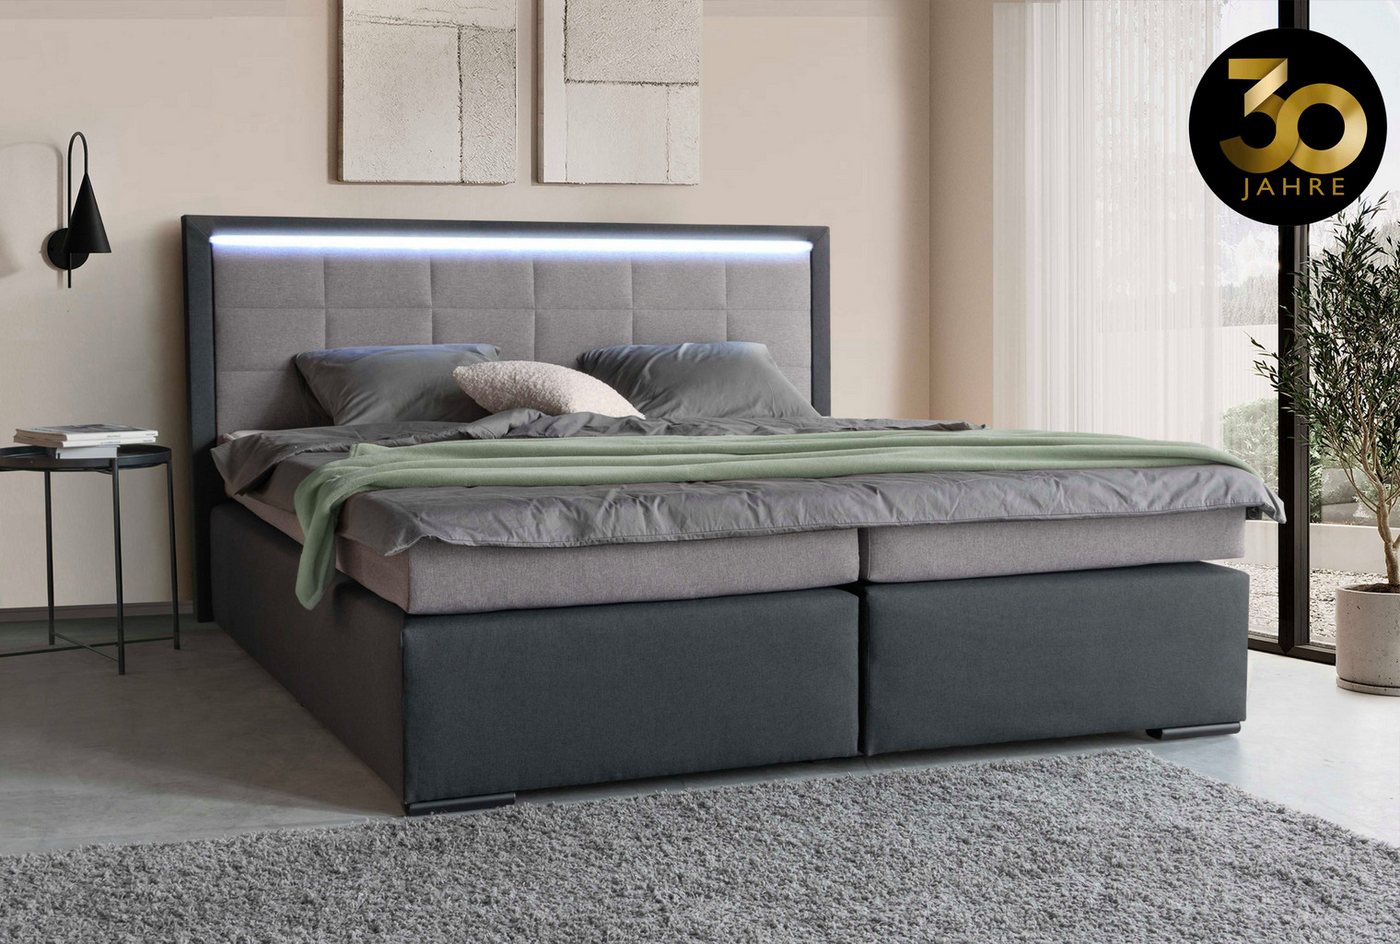 COLLECTION AB Boxspringbett 30 Jahre Jubiläums-Modell Athena, in H2,H3 & H4, inkl. LED-Leiste von COLLECTION AB